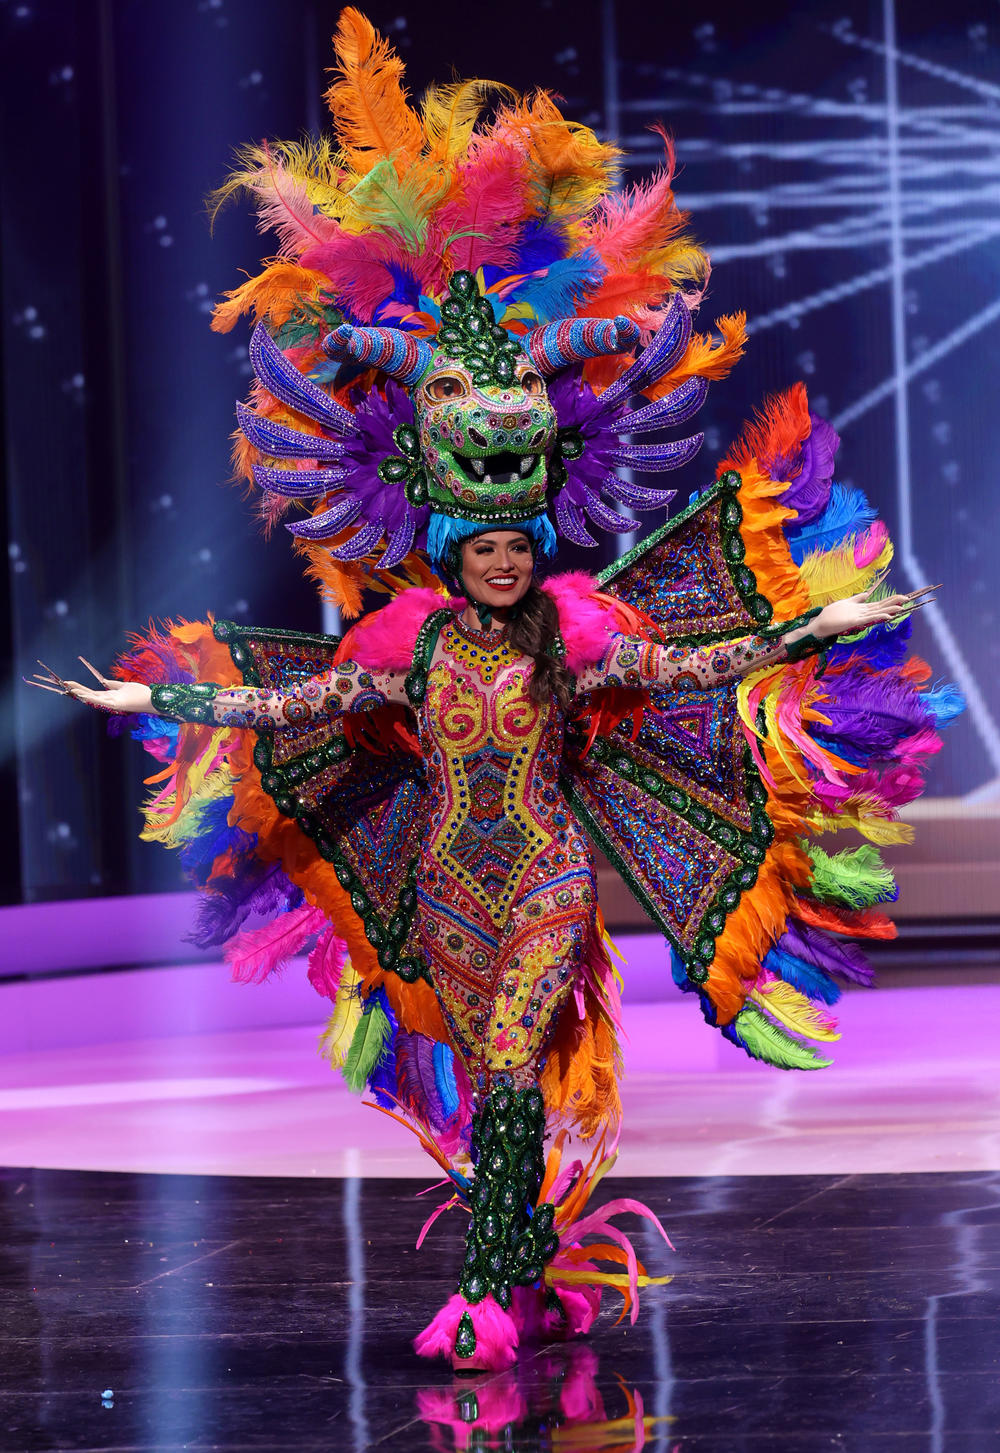 Miss Mexico Andrea Meza was crowned Miss Universe 2020. Here, she appears onstage during the competition.